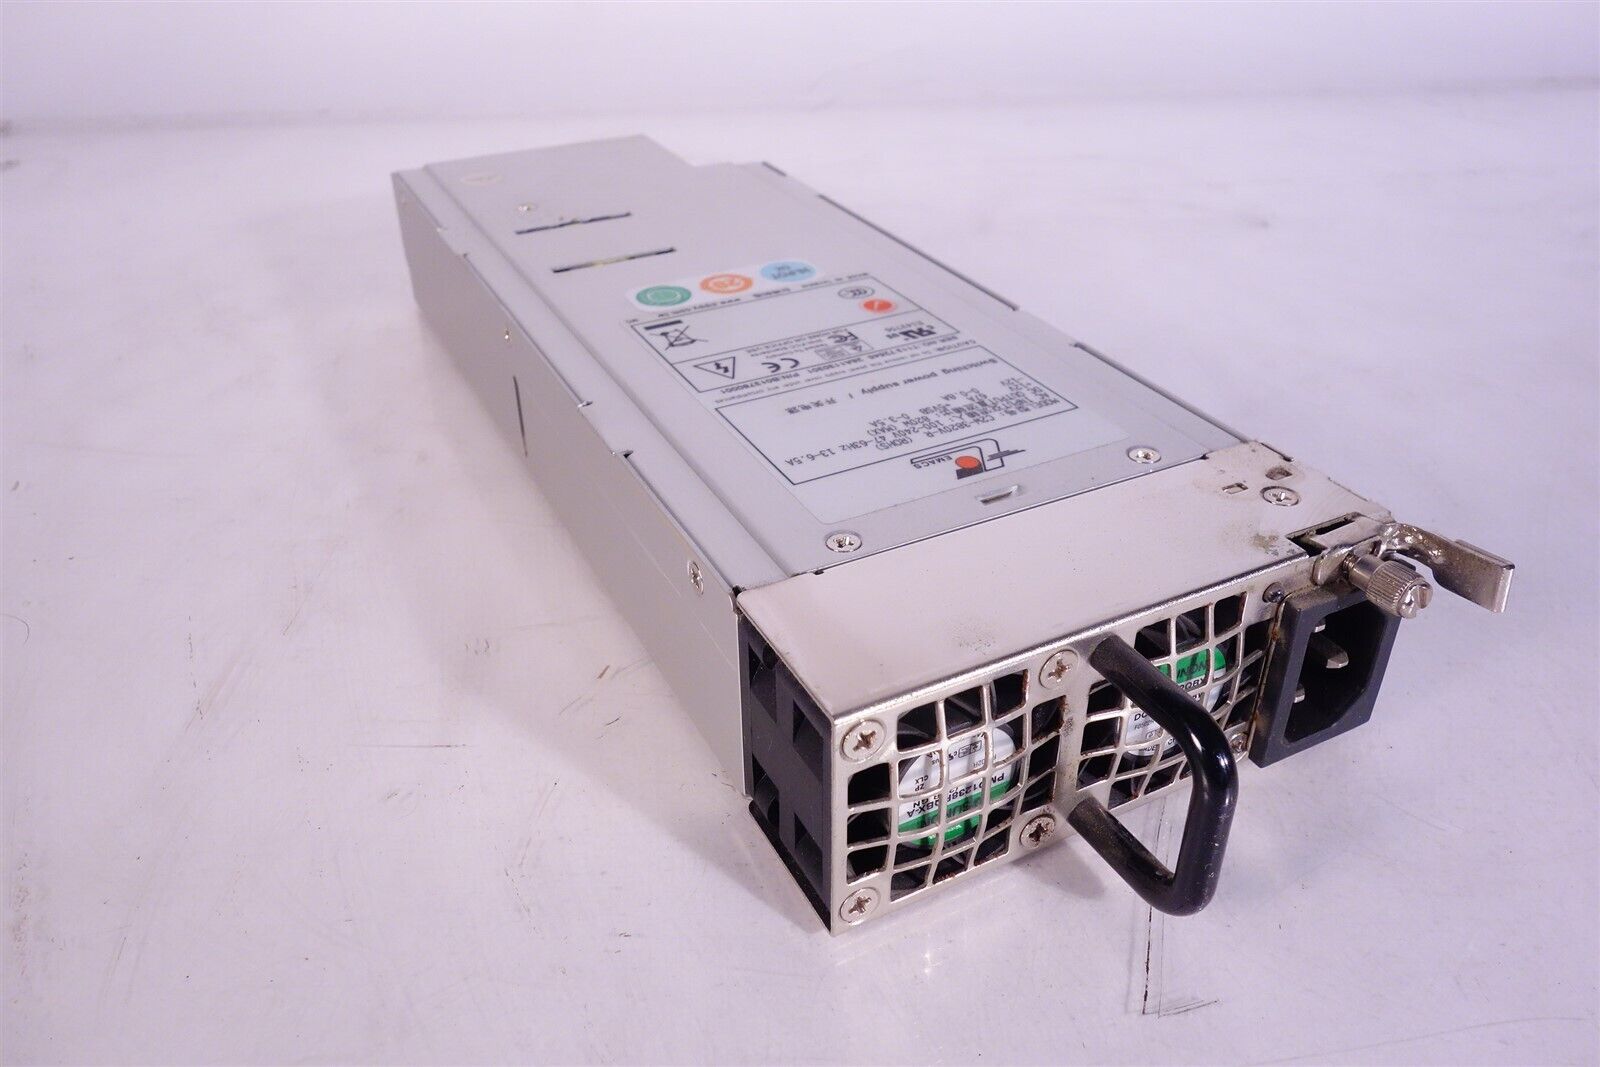 ZIPPY EMACS C2W-3820V-R industrial POWER SUPPLY - CAN SHIP OVERNIGHT OR 2 DAY